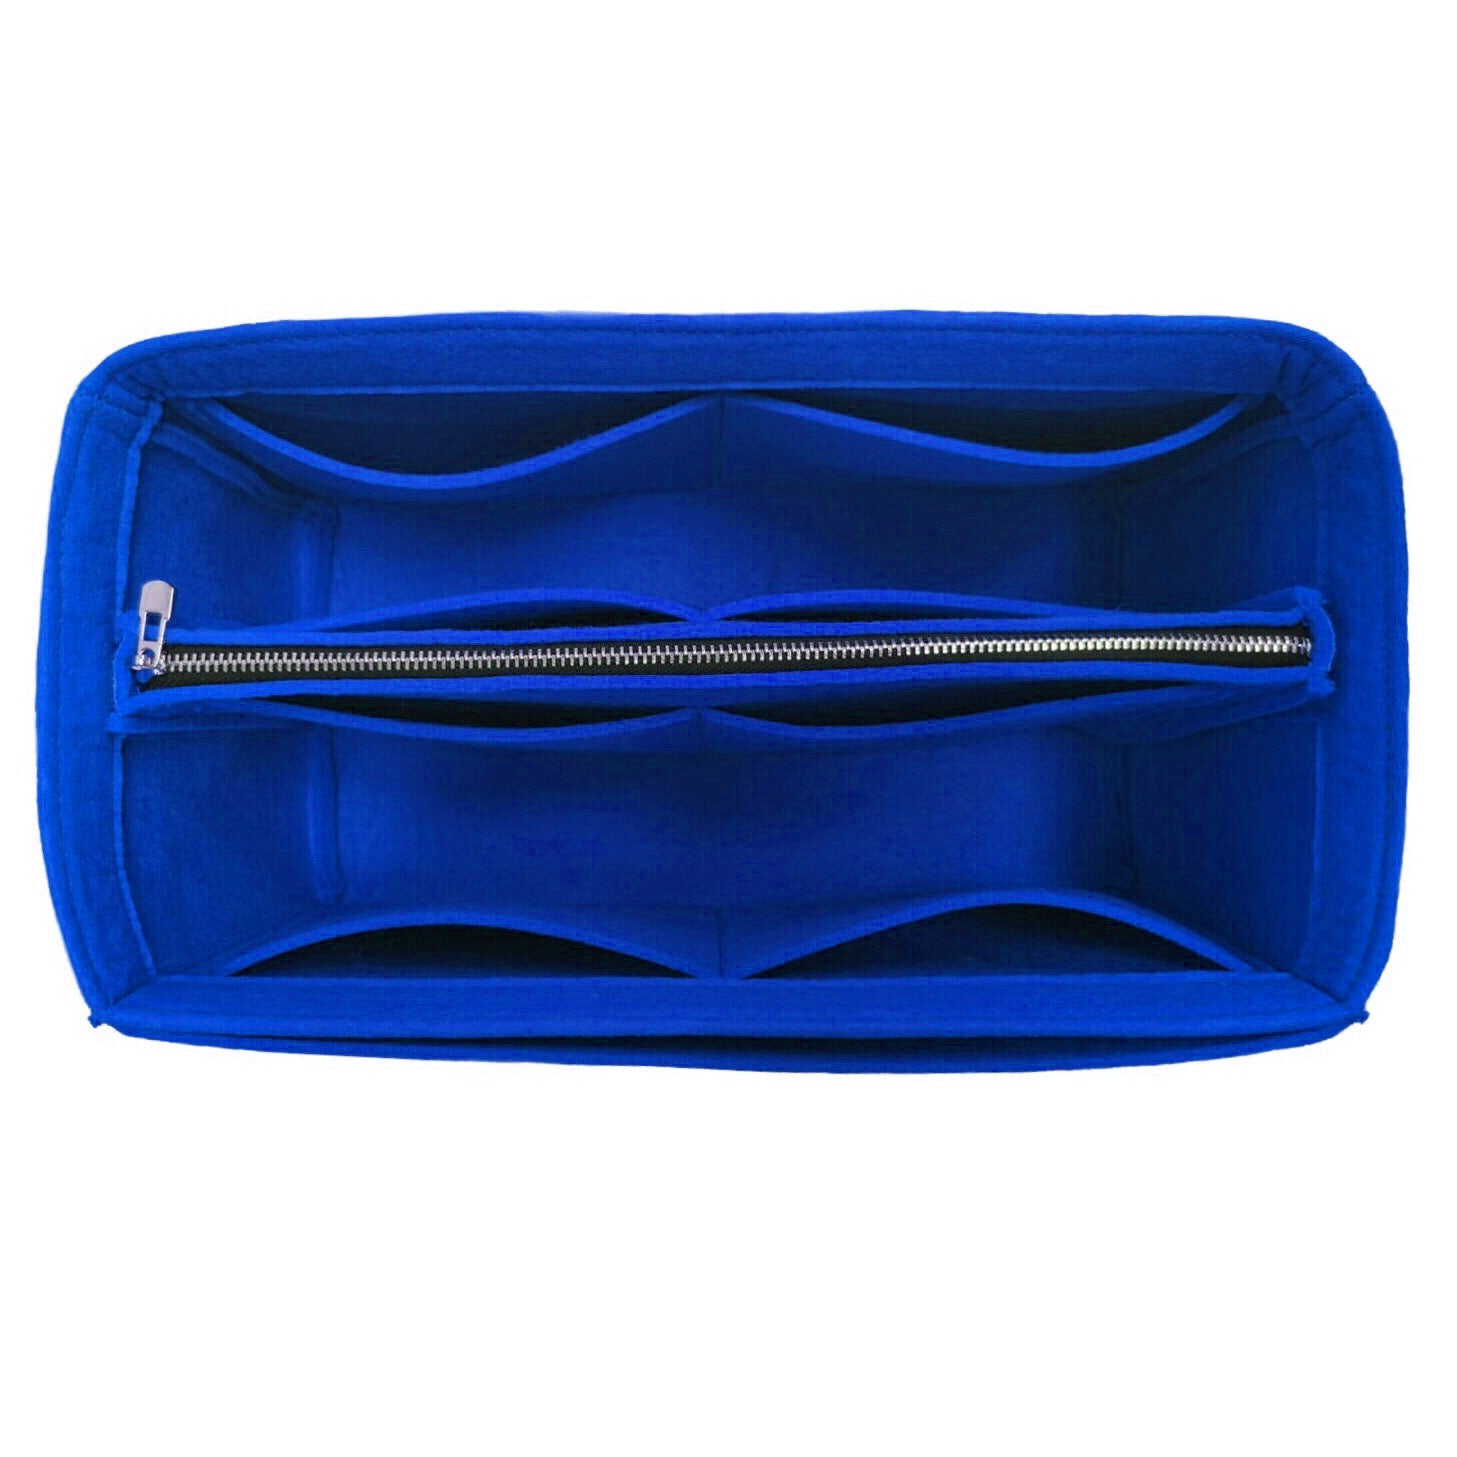 Divitize® Organizer for Cabas Y (ChYc) bag